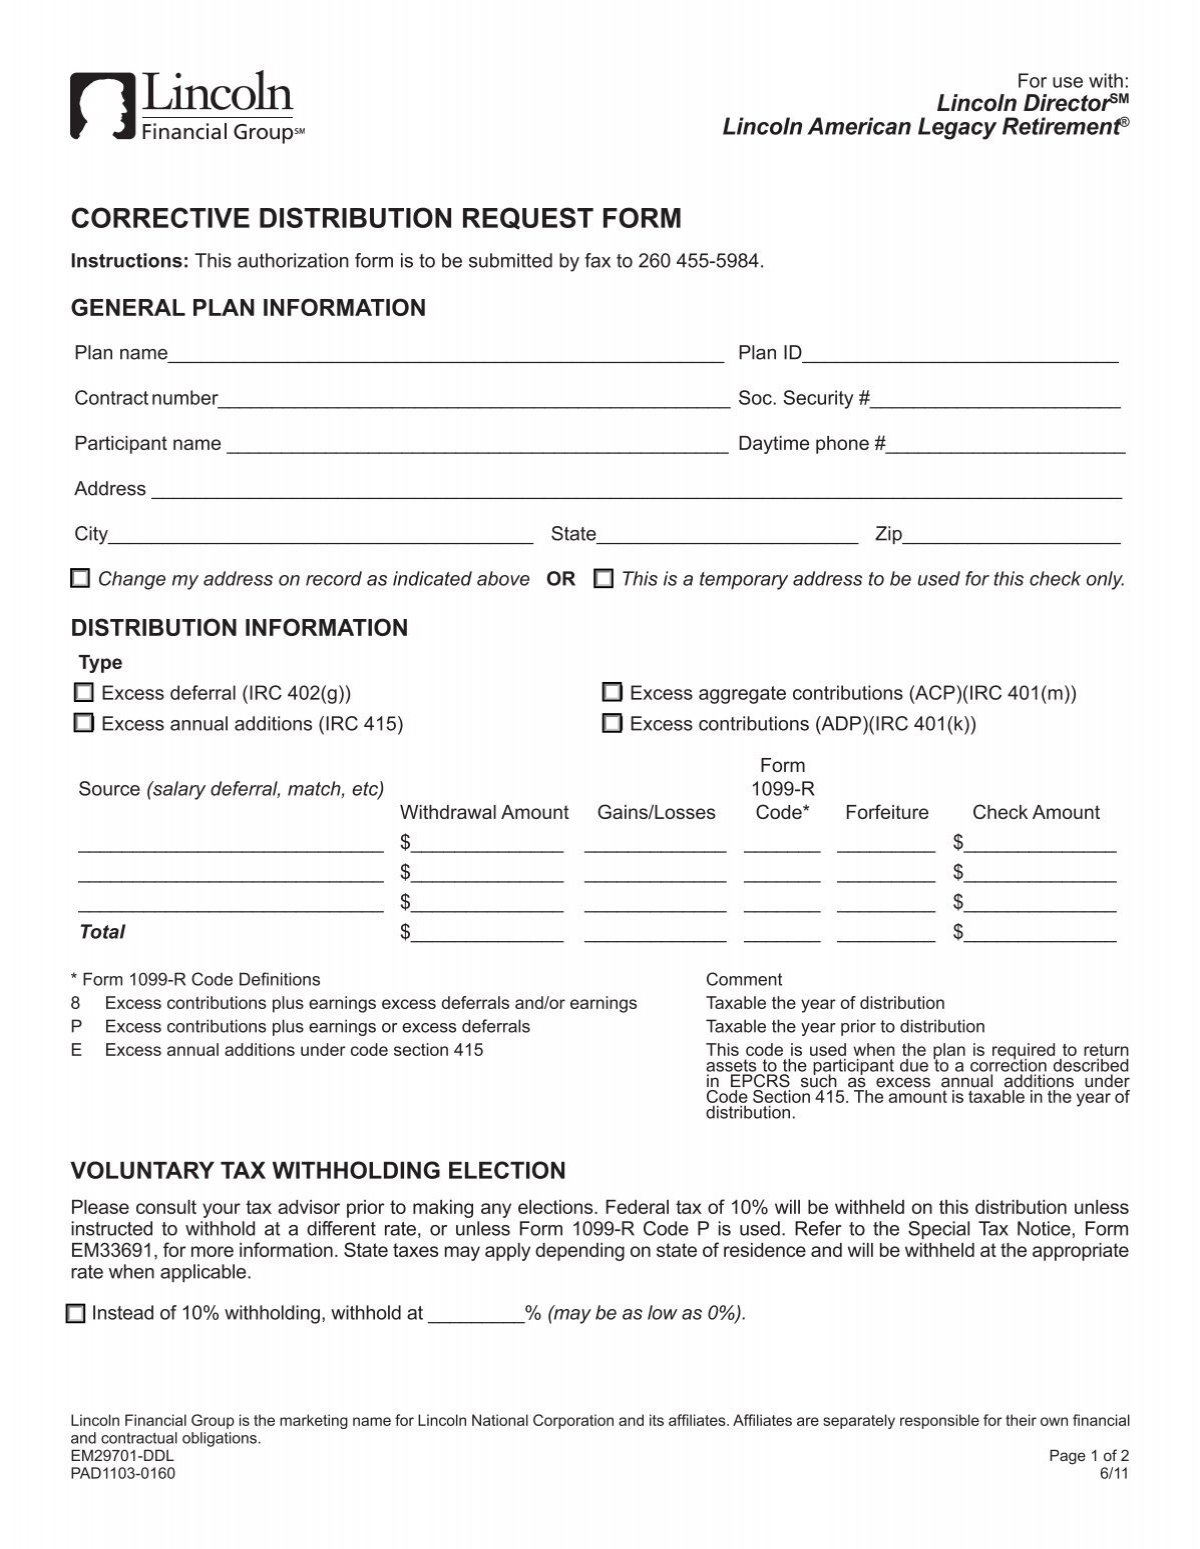 corrective-distribution-request-form-lincoln-financial-group